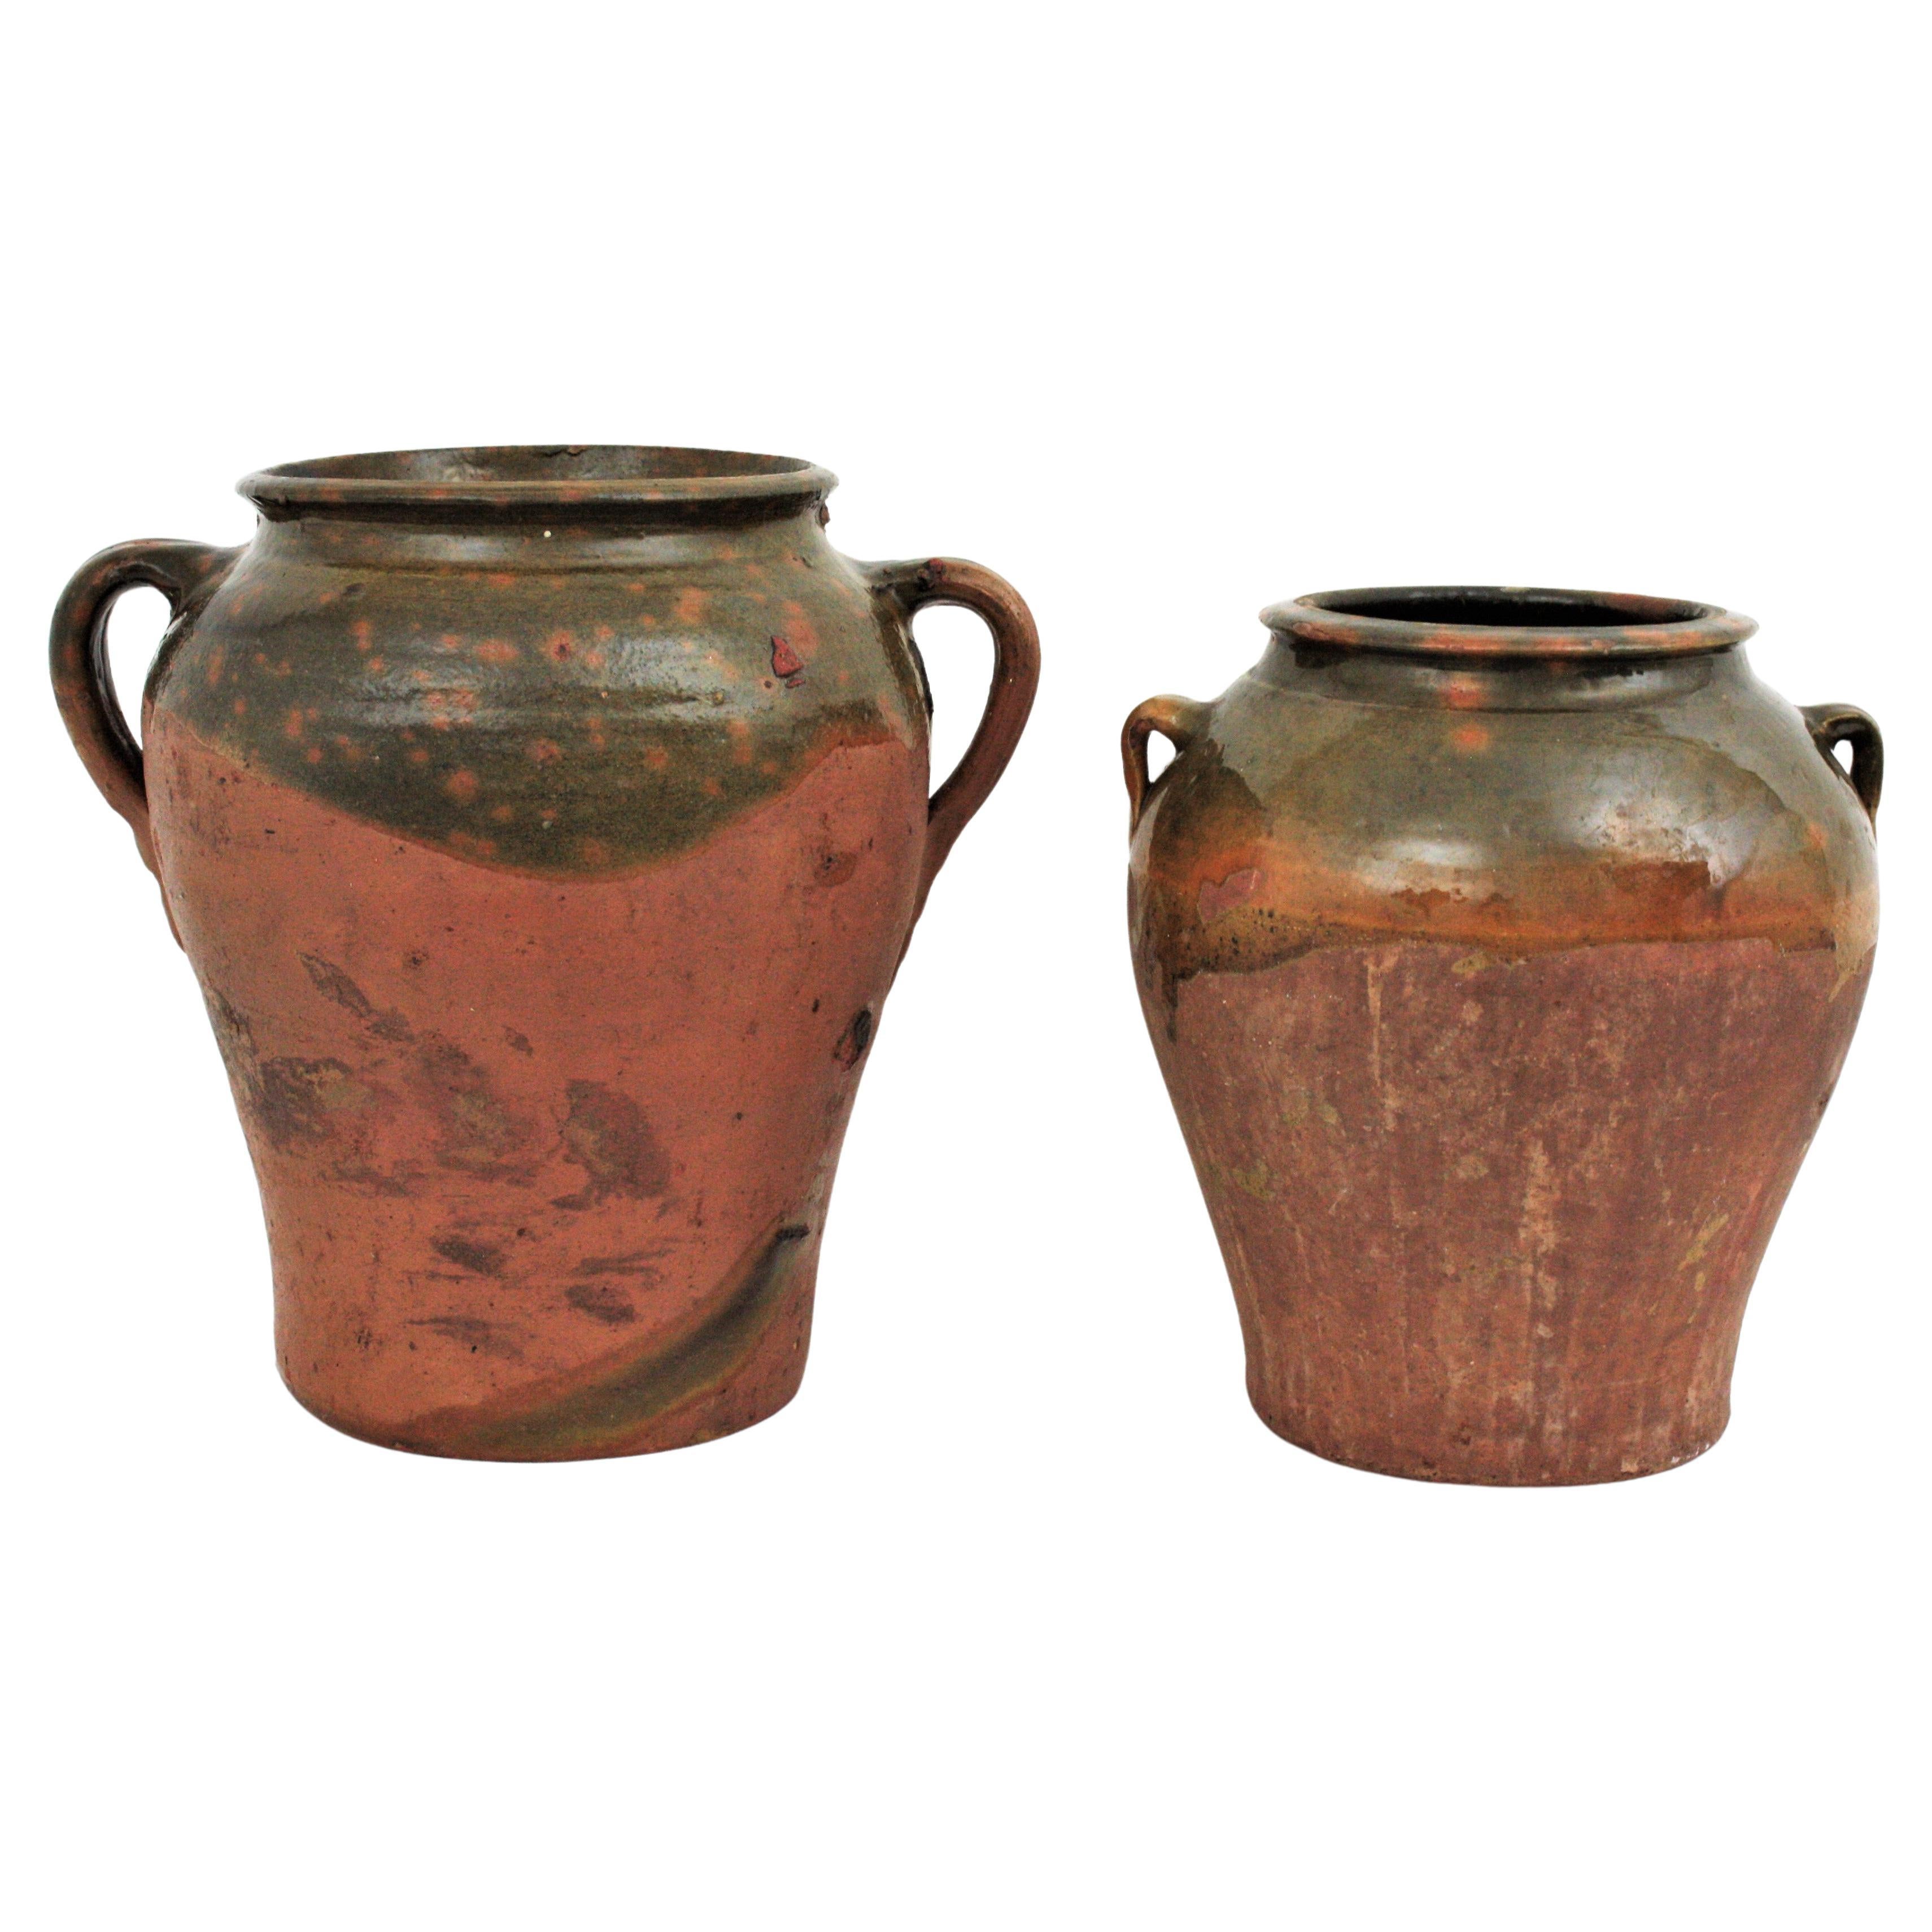 Handmade terracotta preserving pot or jar with handles from Segovia, Spain, 1930s
Two traditional Spanish ceramic 'orza'. Unglazed exterior with handles at both sides and green and brown color glaze on the top and at the interior to preserve olive